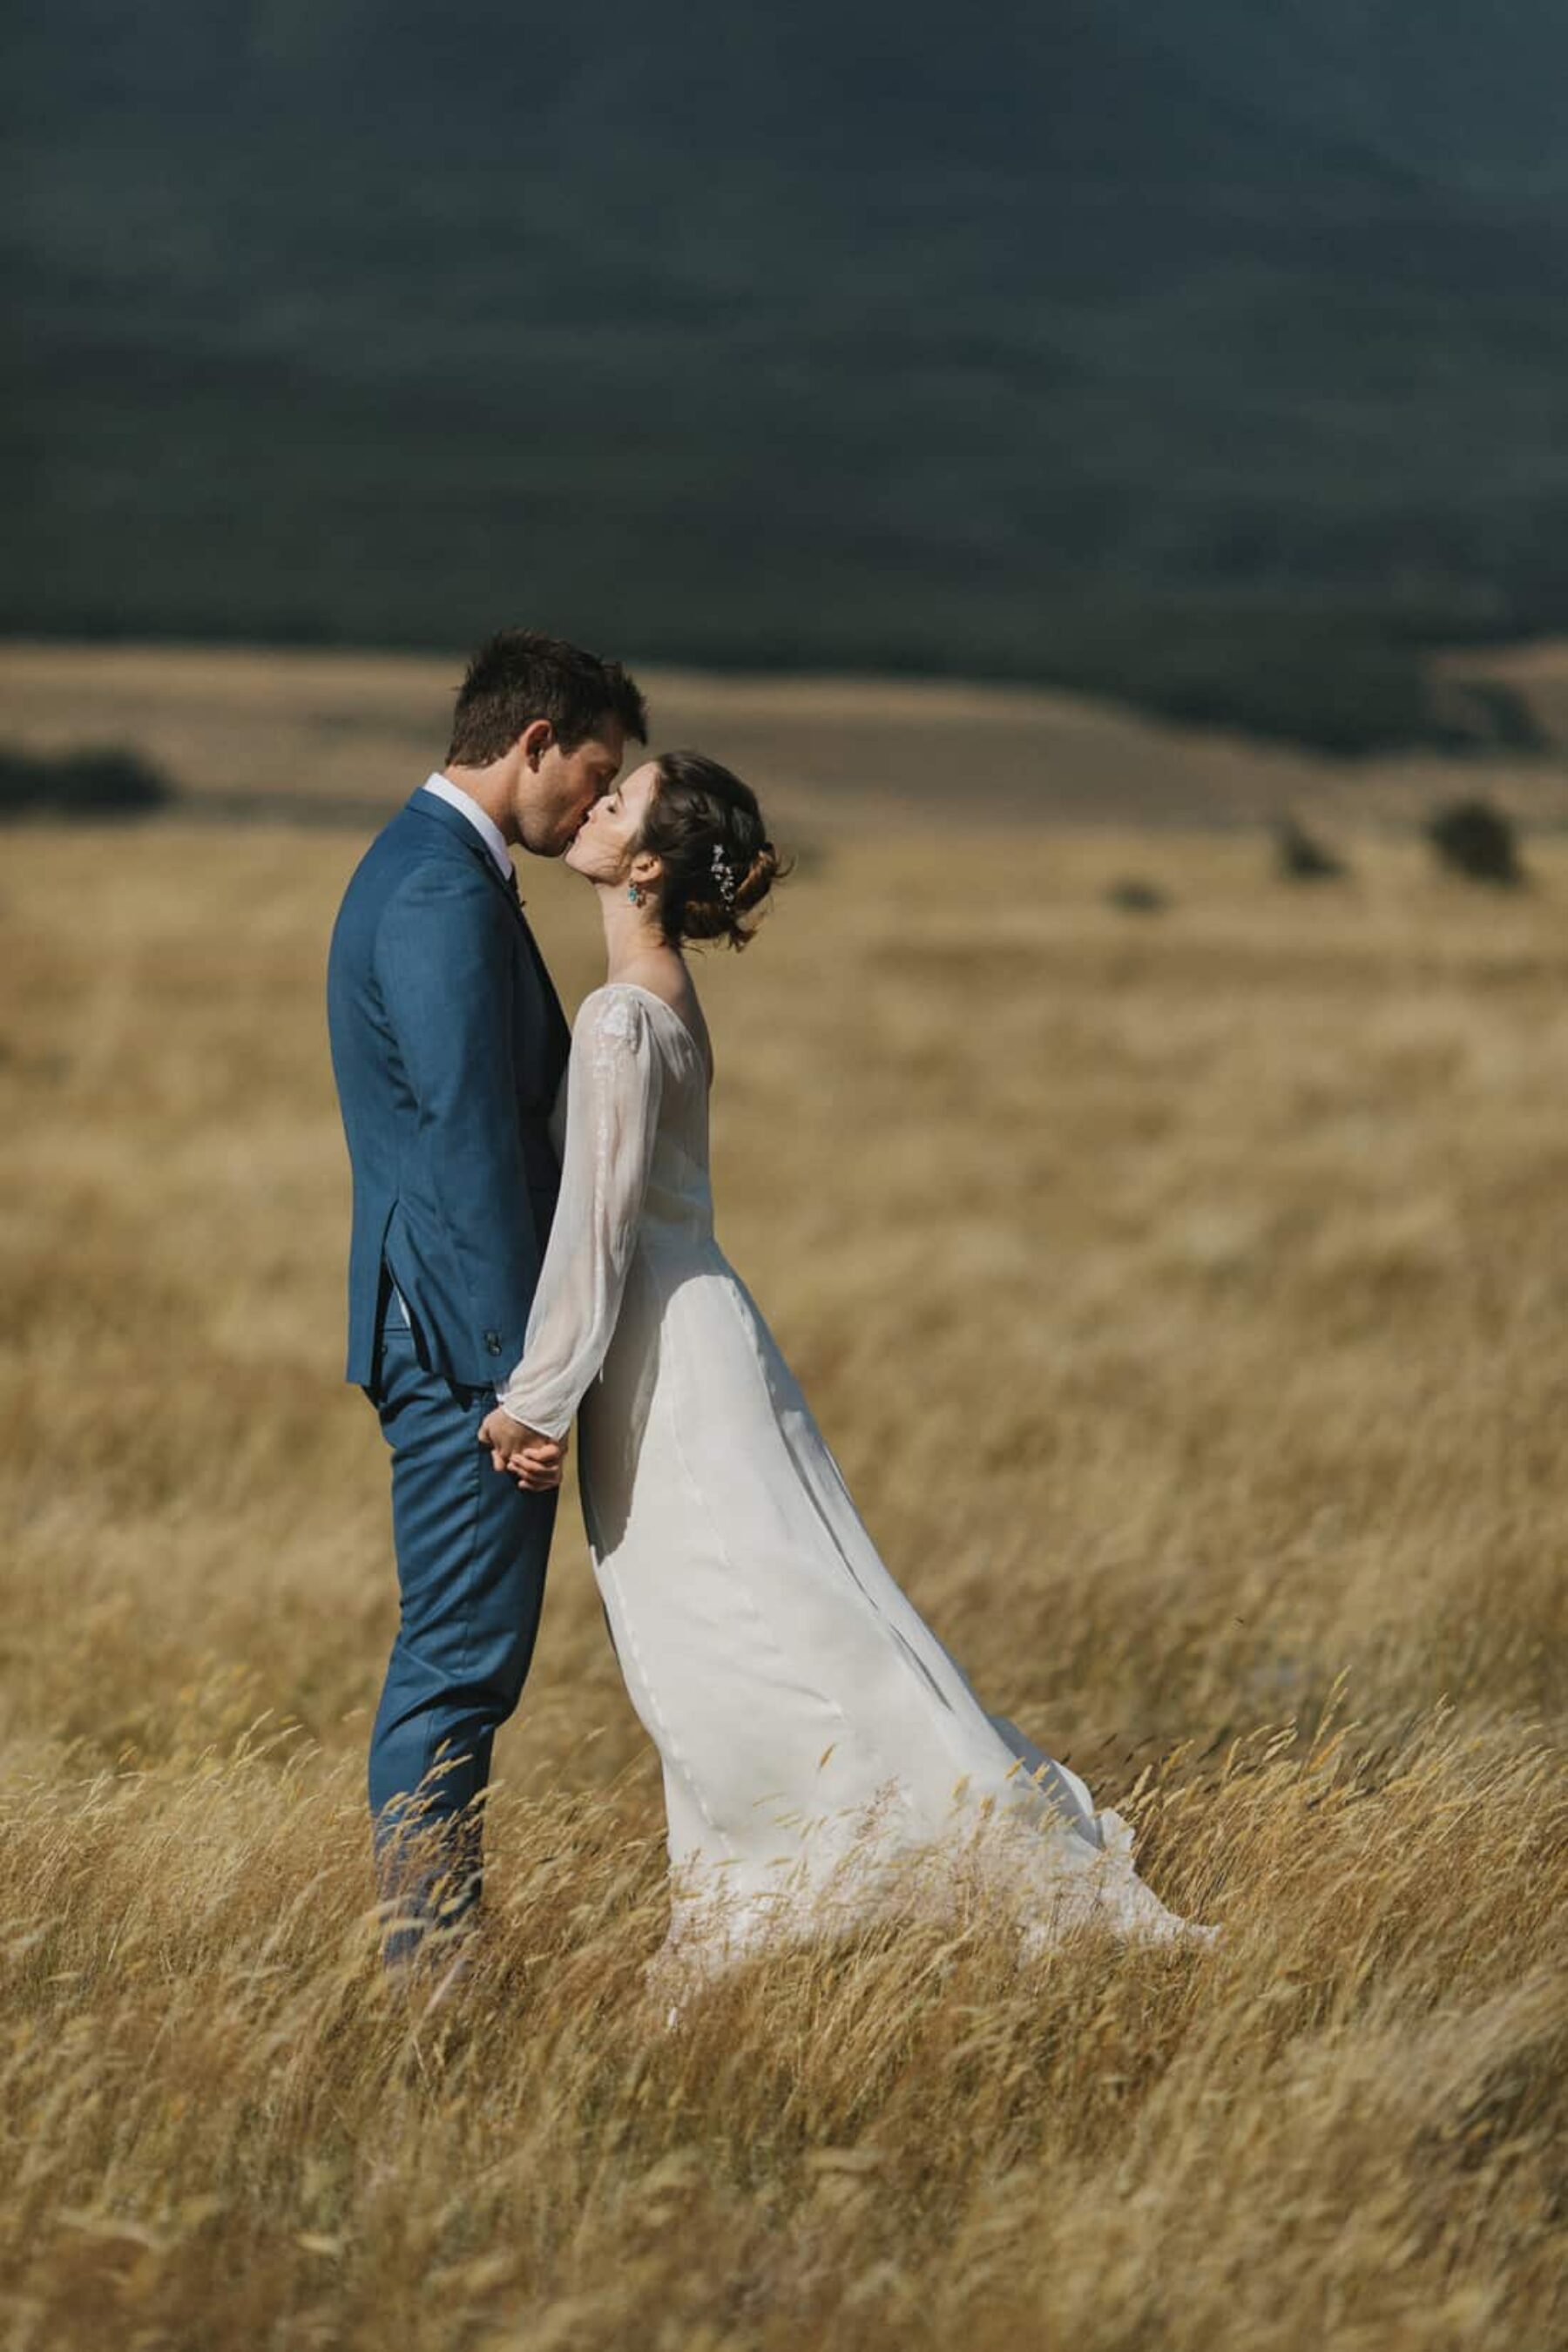 Autumn wedding in the wilderness of New Zealand's South Island